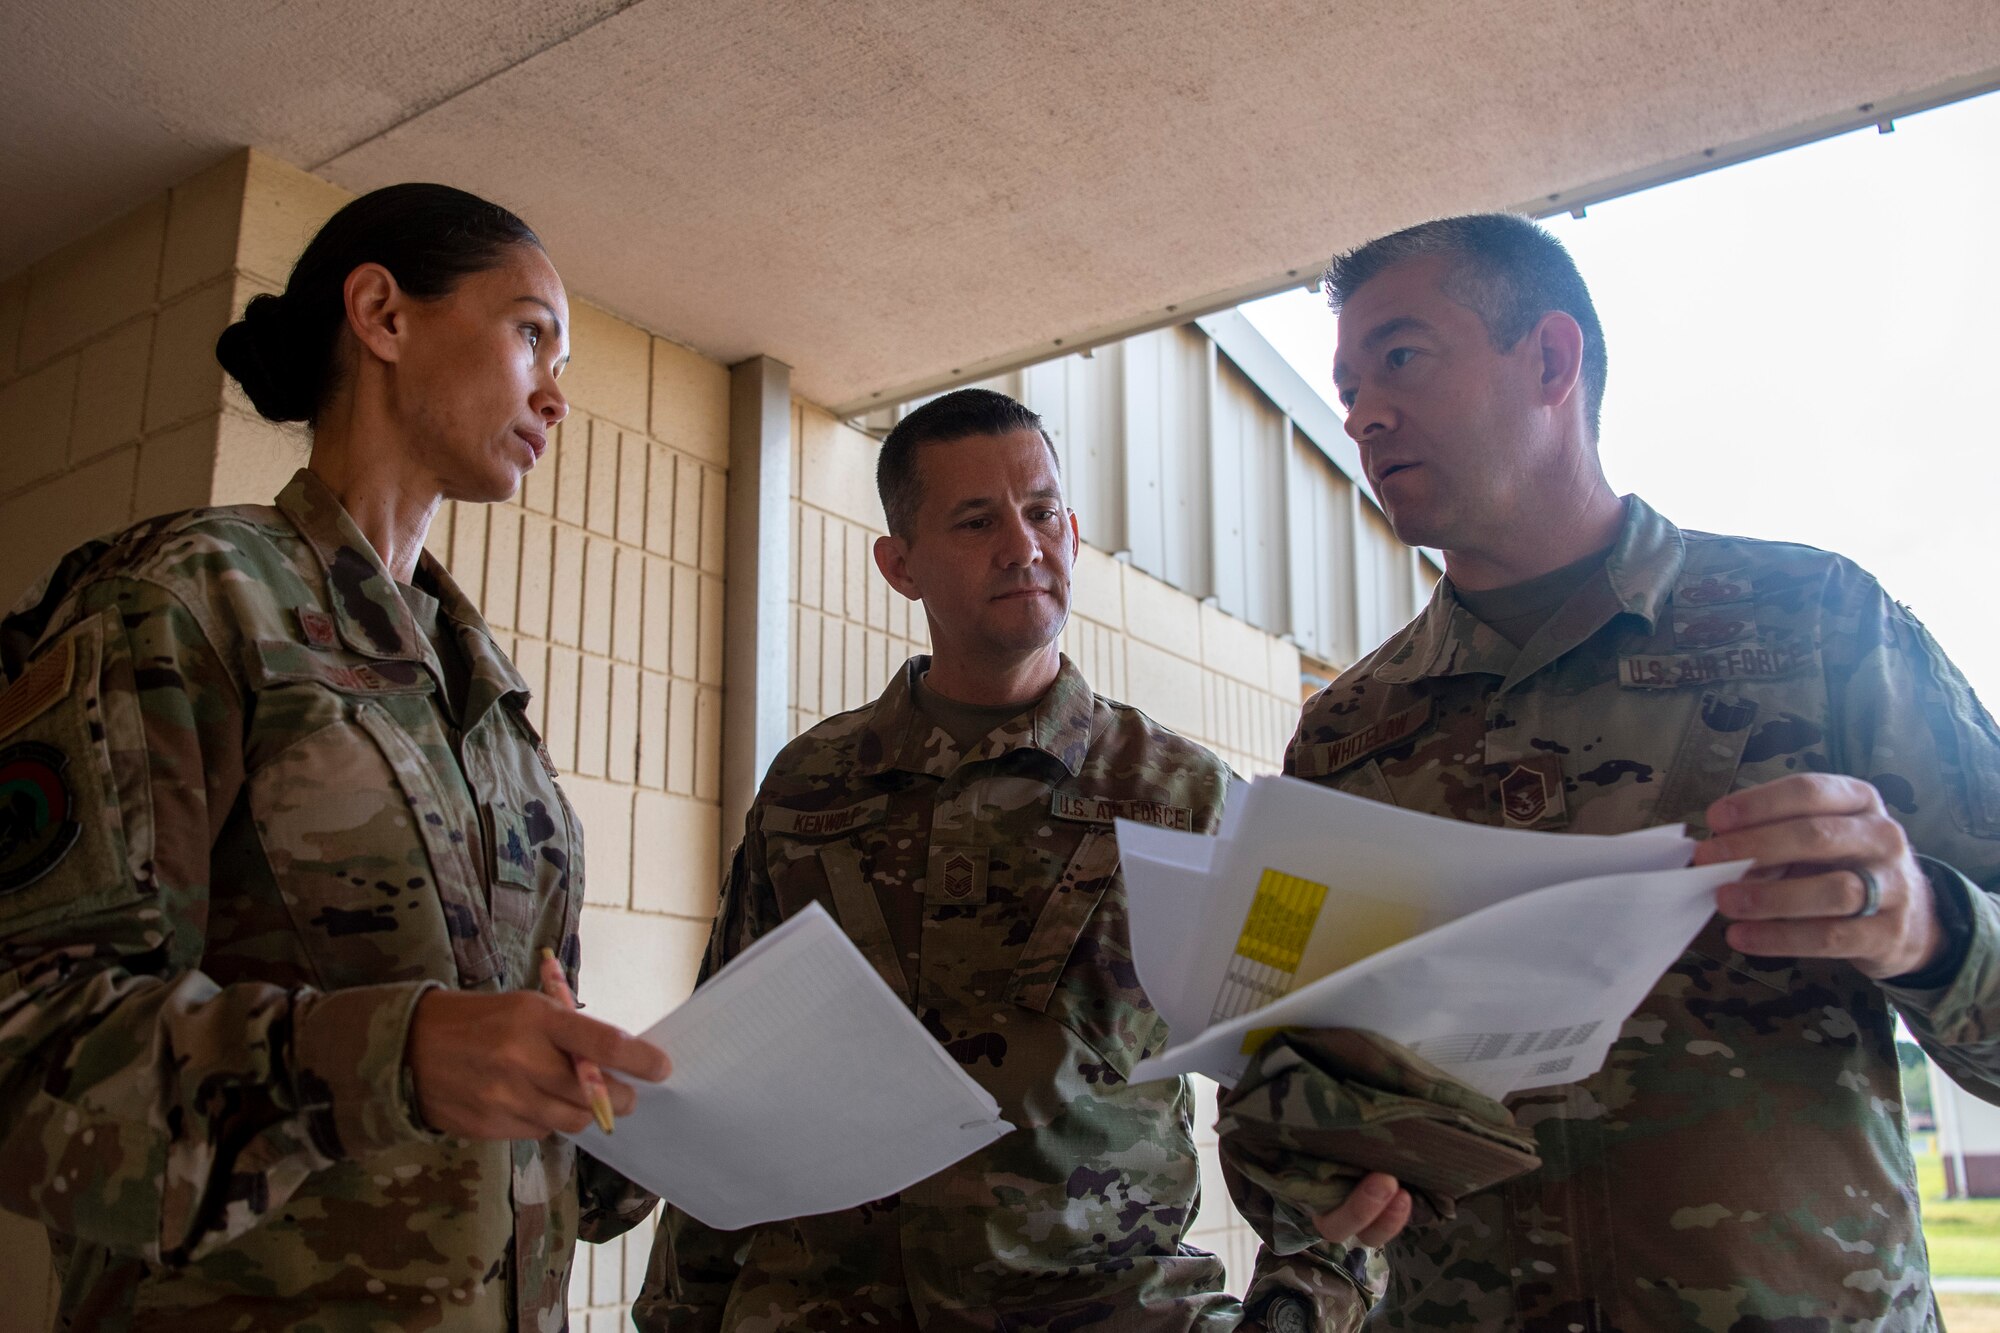 Lt. Col. Anjanette Lowe and Chief Master Sgt. James Kenwolf, 48th Aerial Port Squadron leadership, are briefed by Senior Master Sgt. Andrew Whitelaw on the different locations APS personnel will be located during a Total Force Integration and Joint Training exercise at Schofield Barracks, Hawaii June 13, 2021.